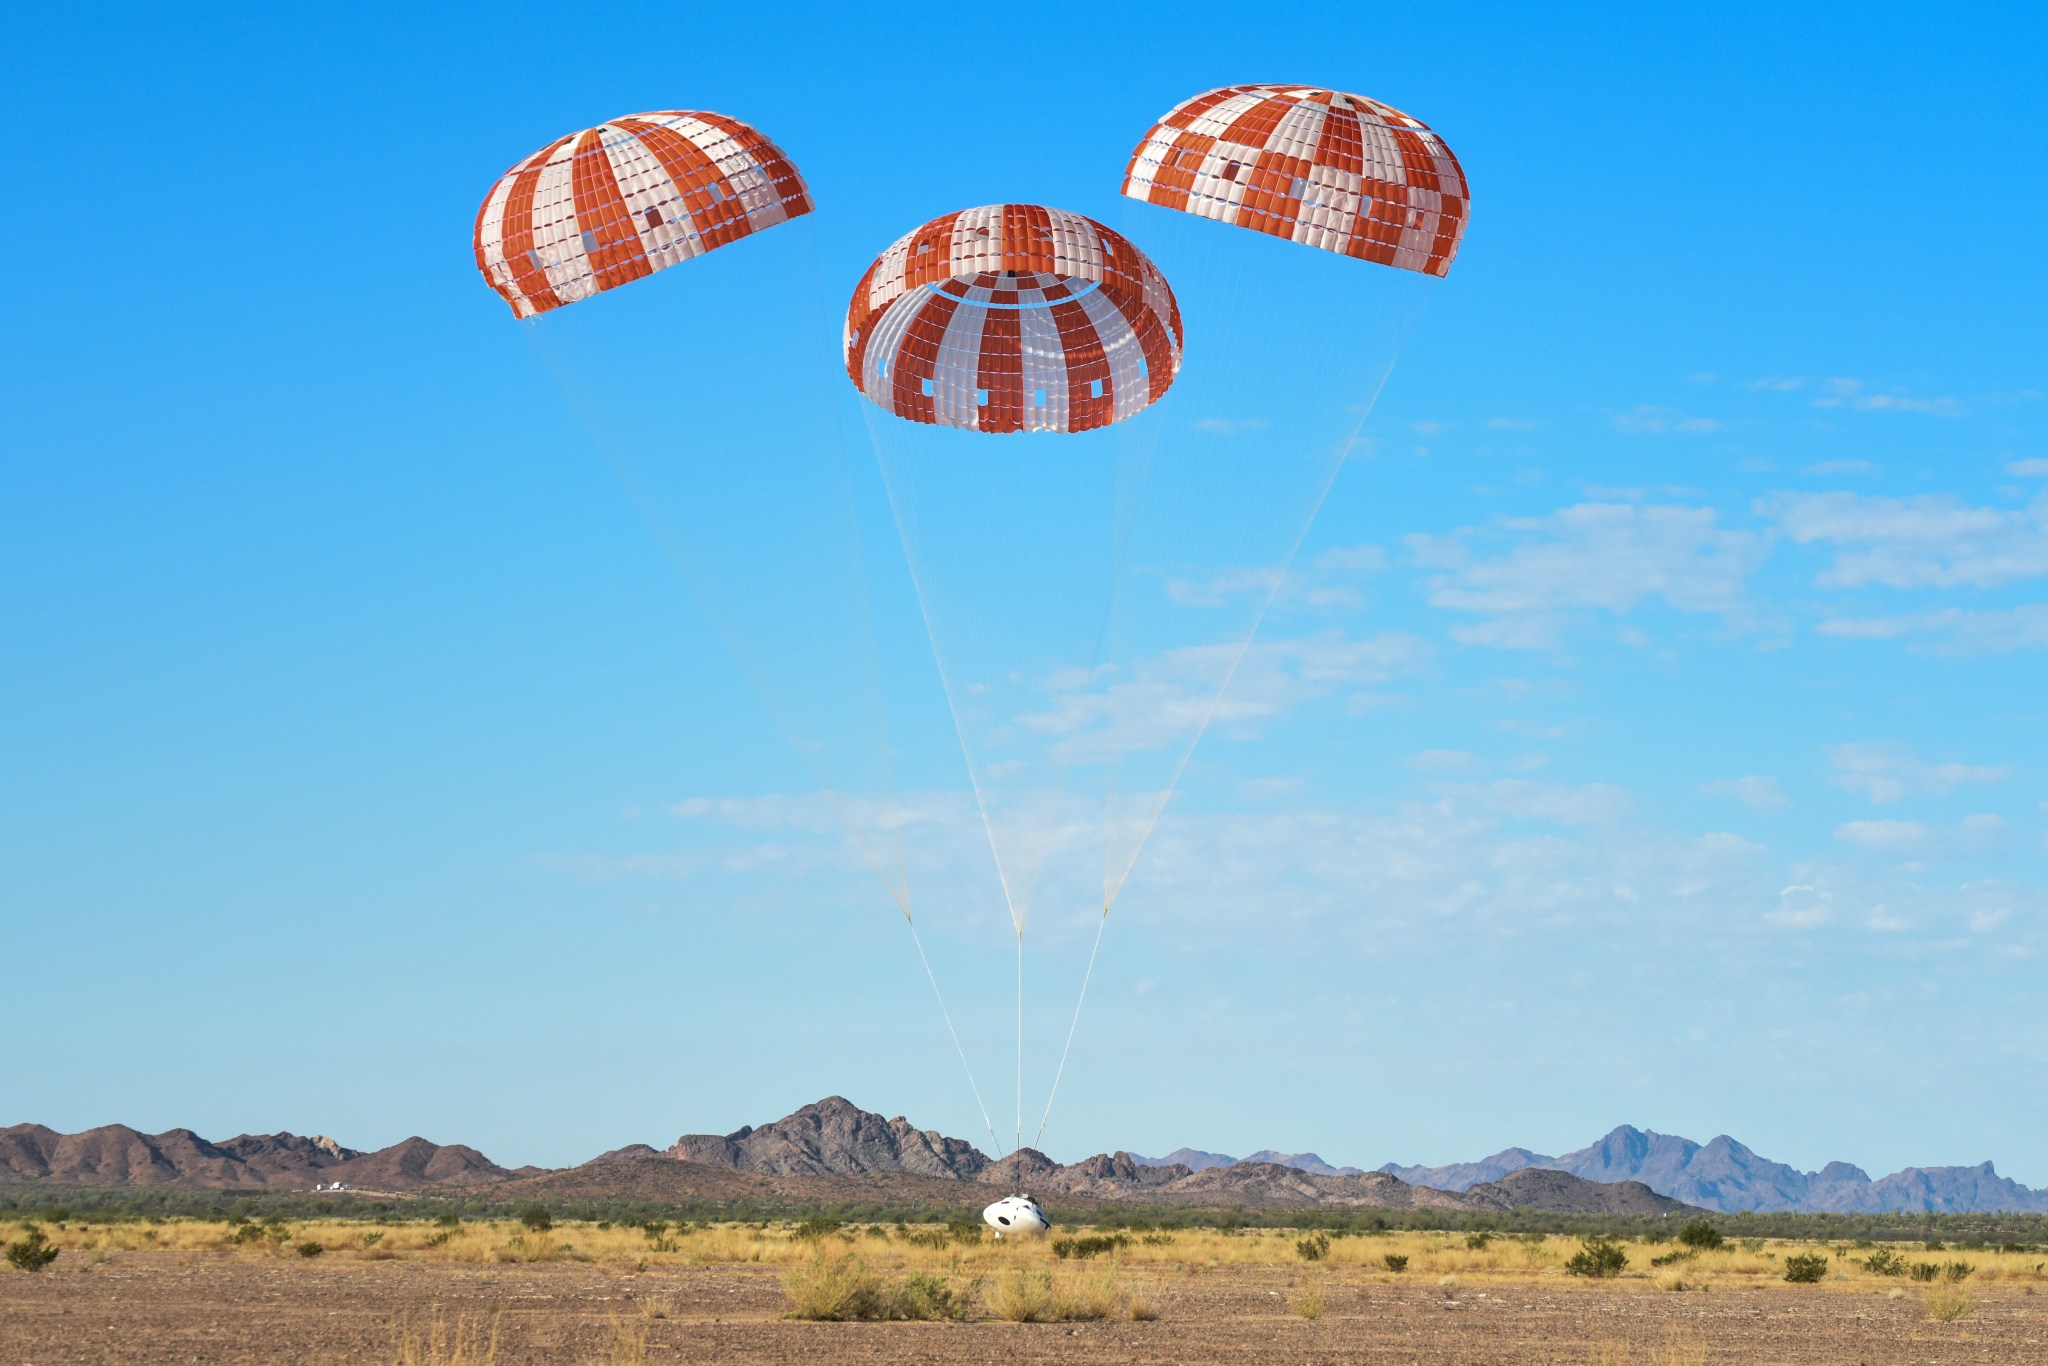 Orion spacecraft with parachutes deployed descends to Earth